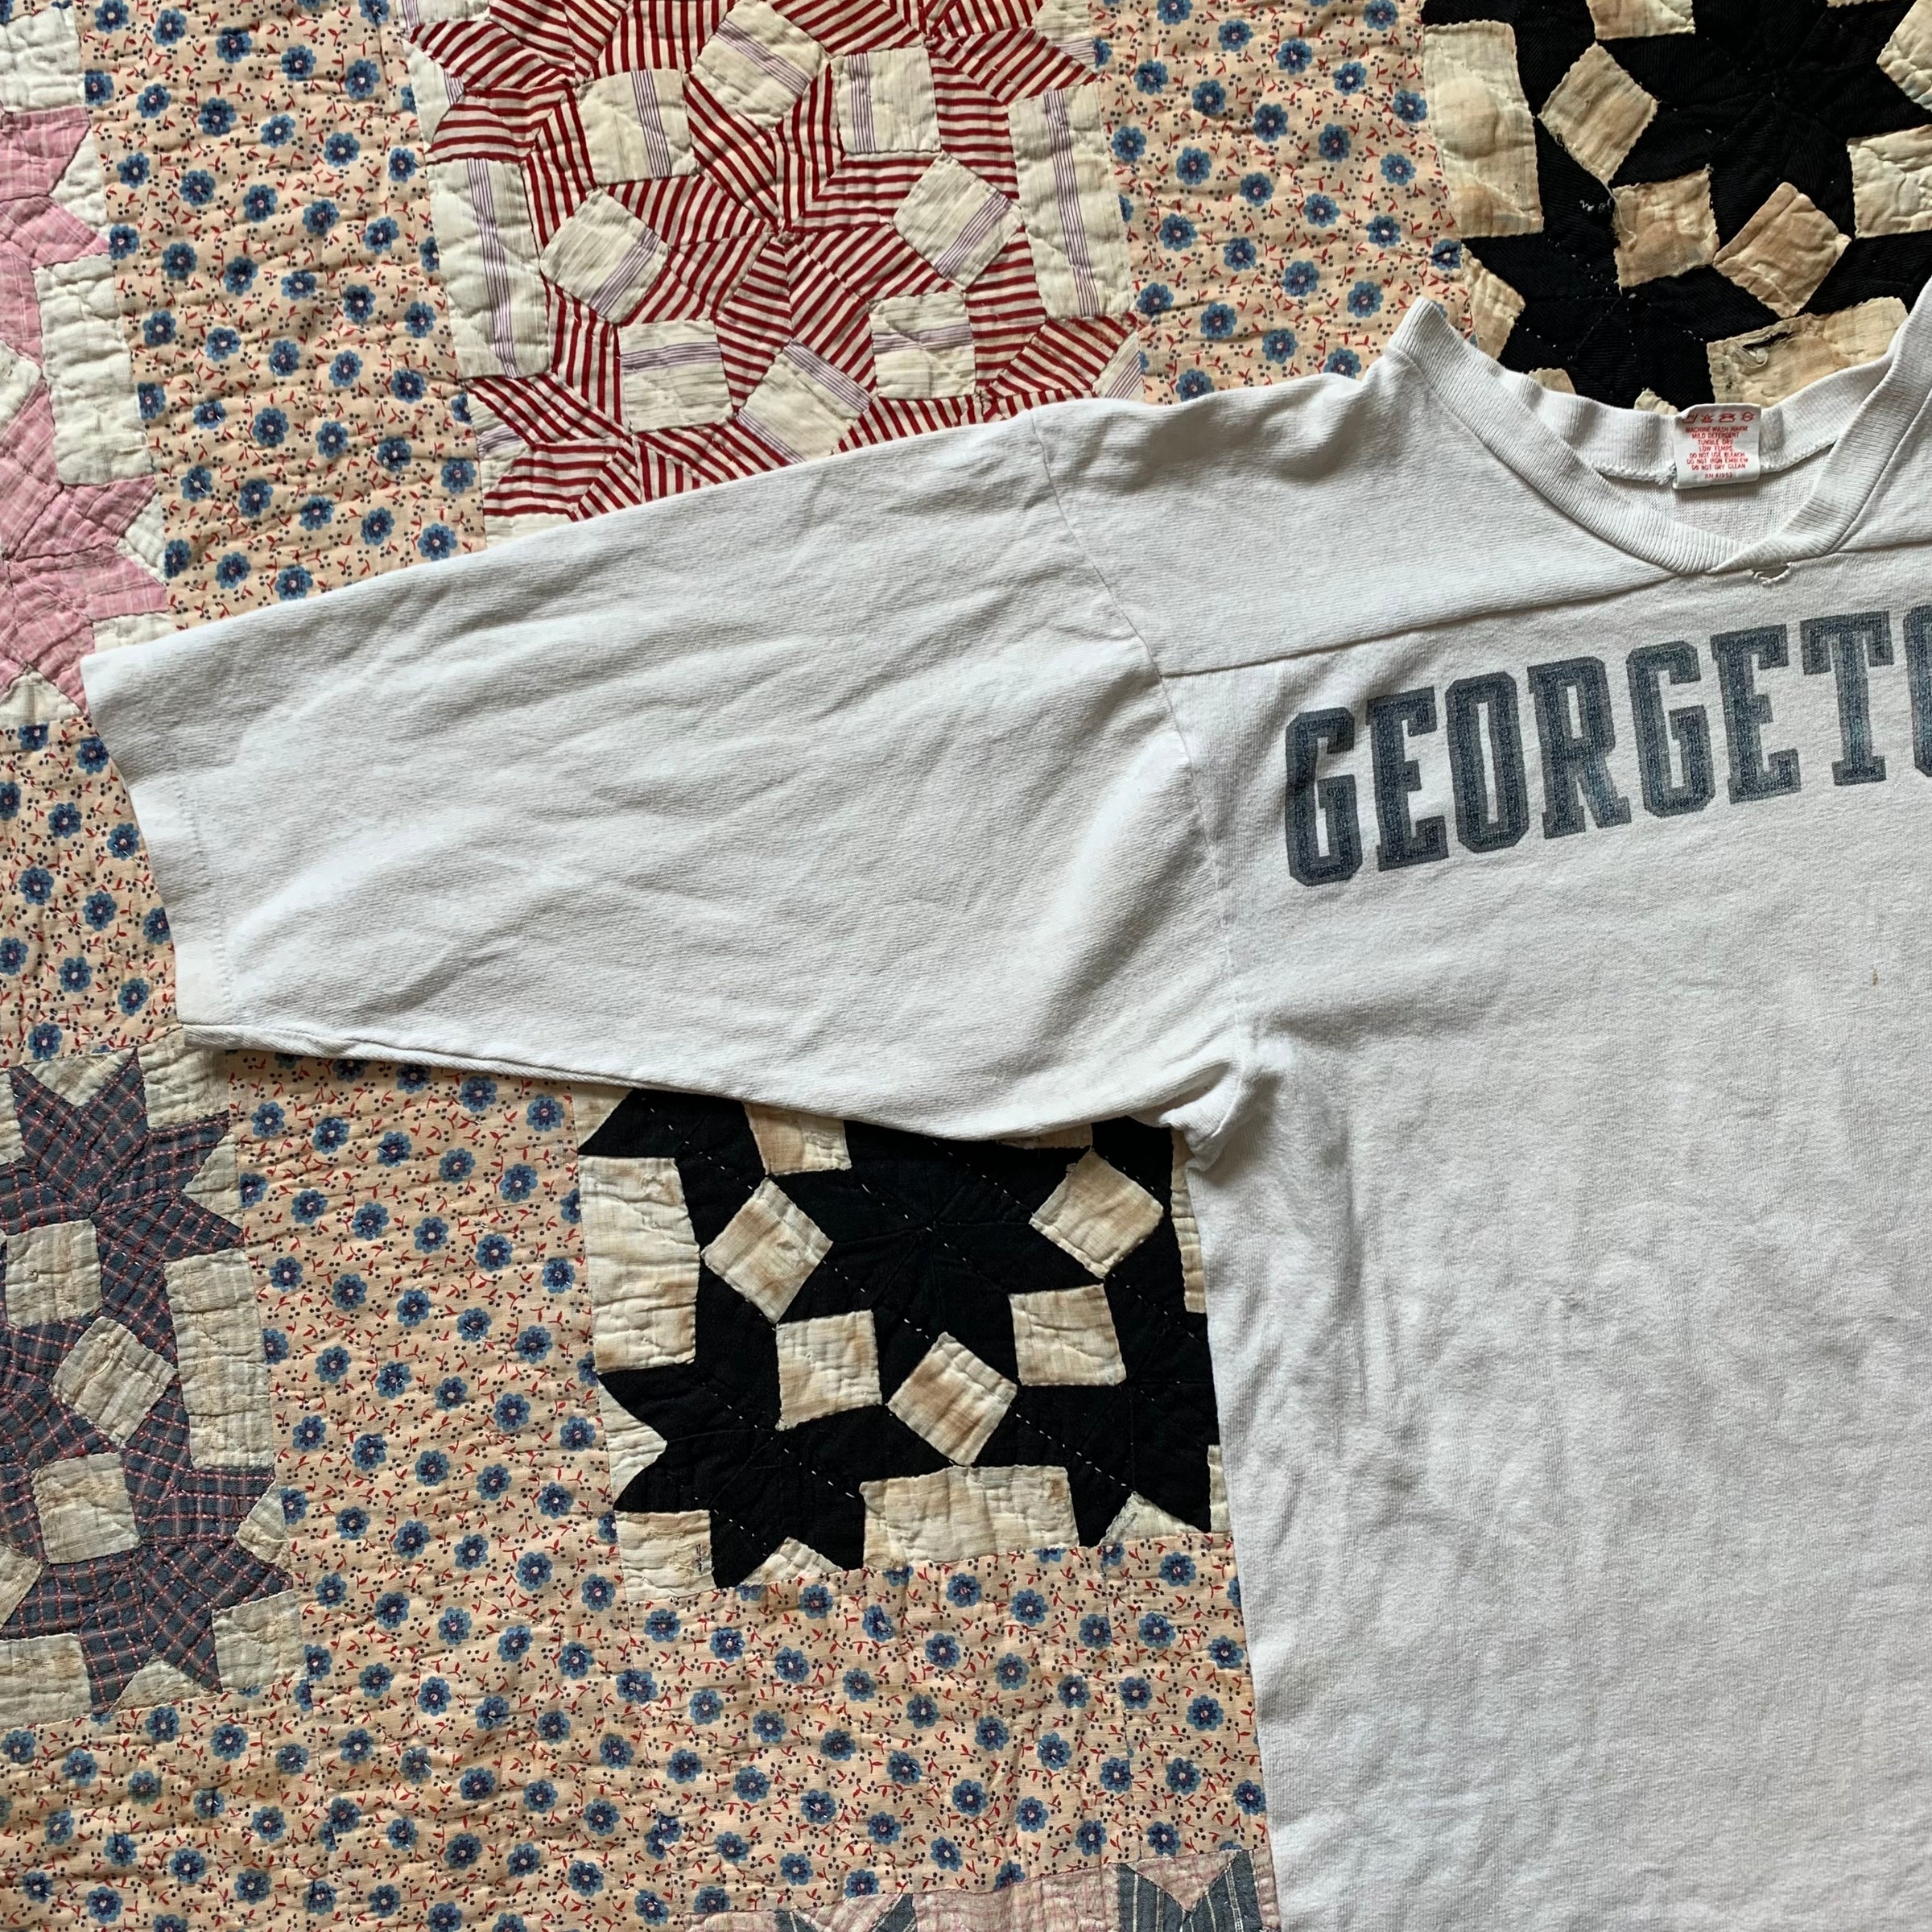 1970's Georgetown Cotton Football T-Shirt Small